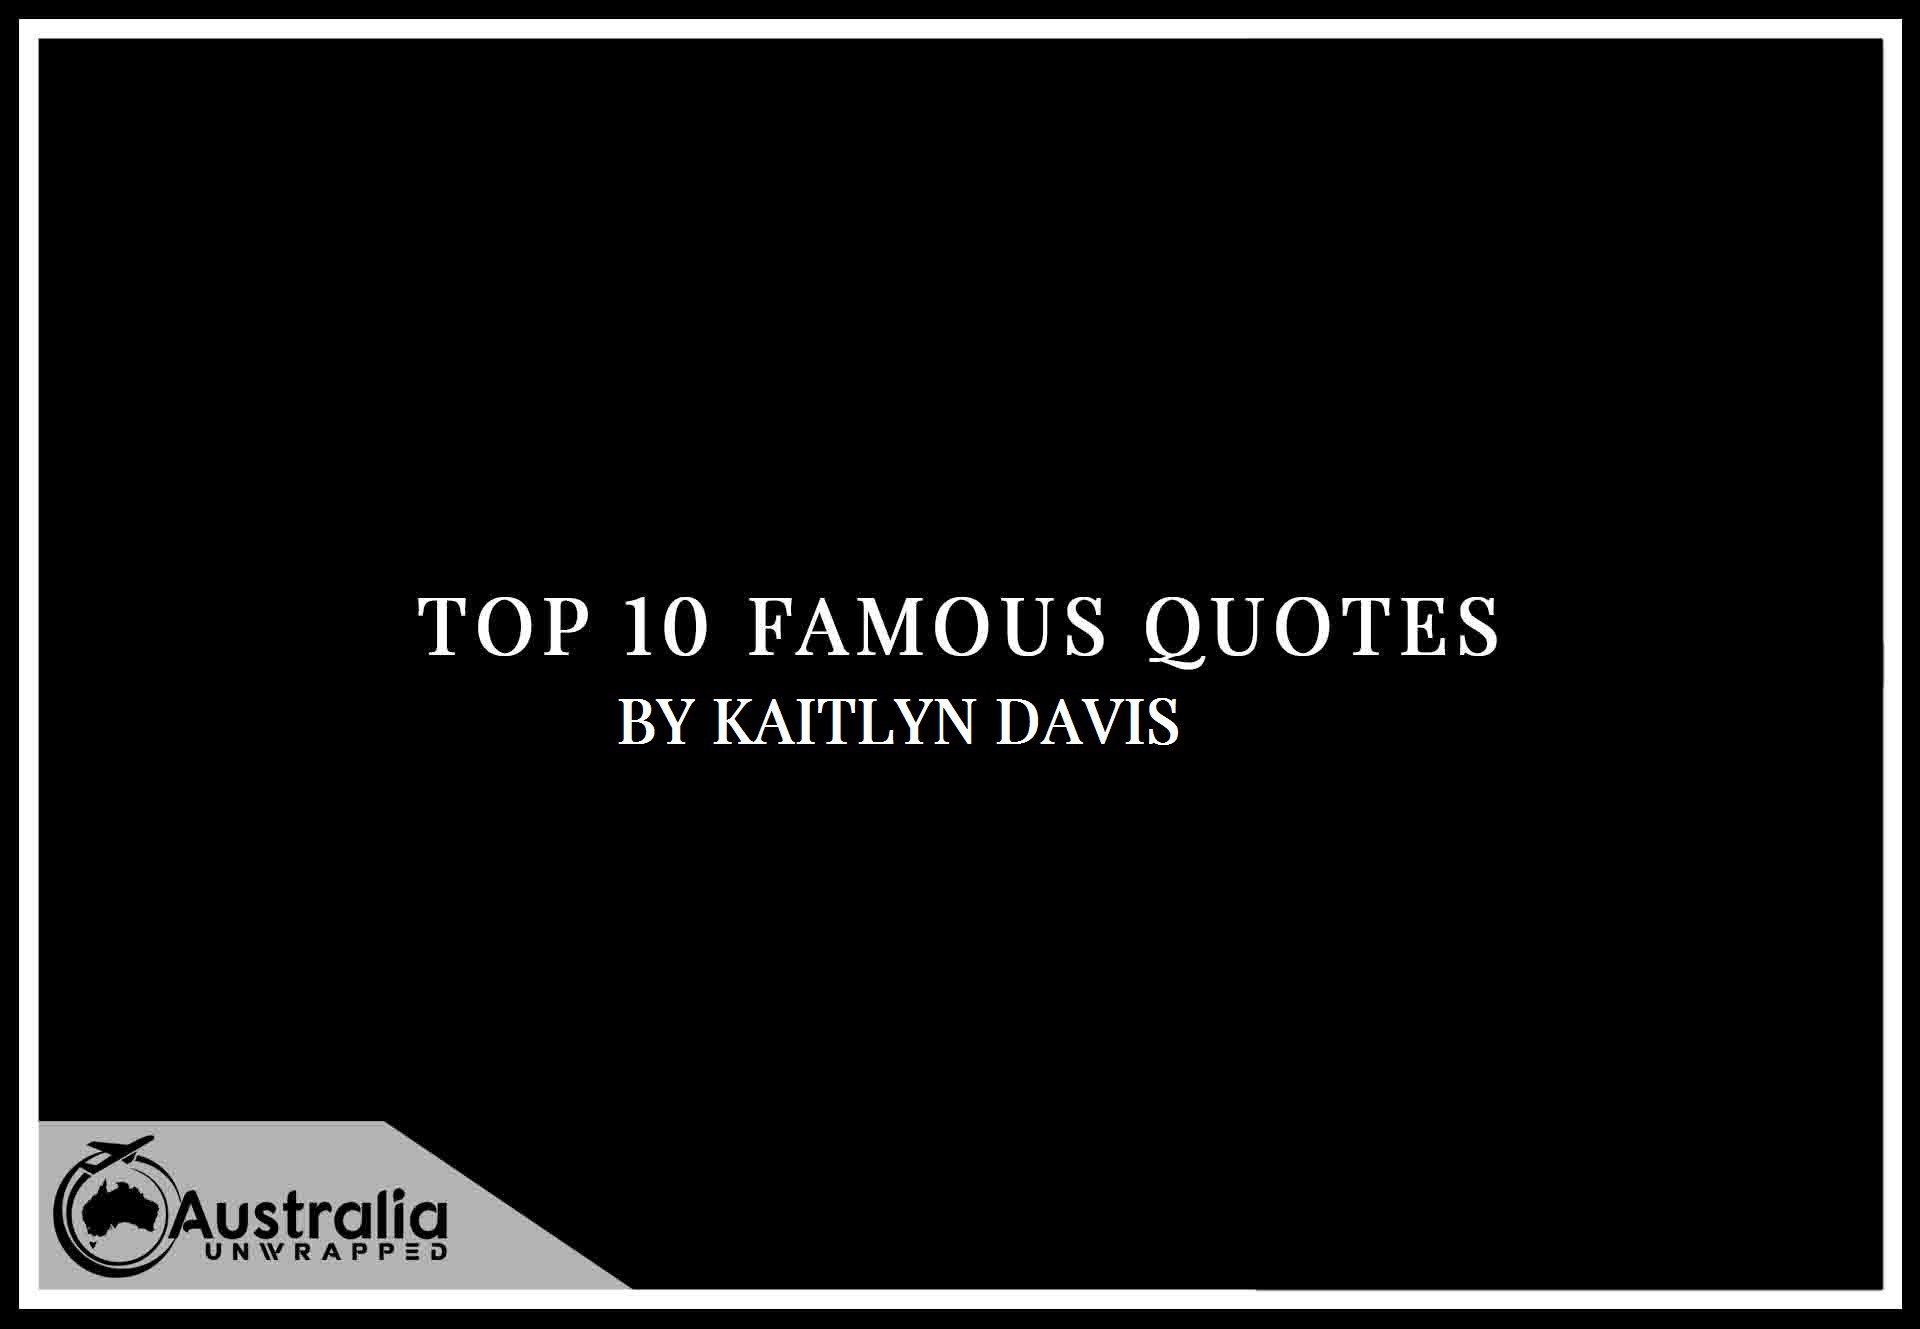 Kaitlyn Davis’s Top 10 Popular and Famous Quotes